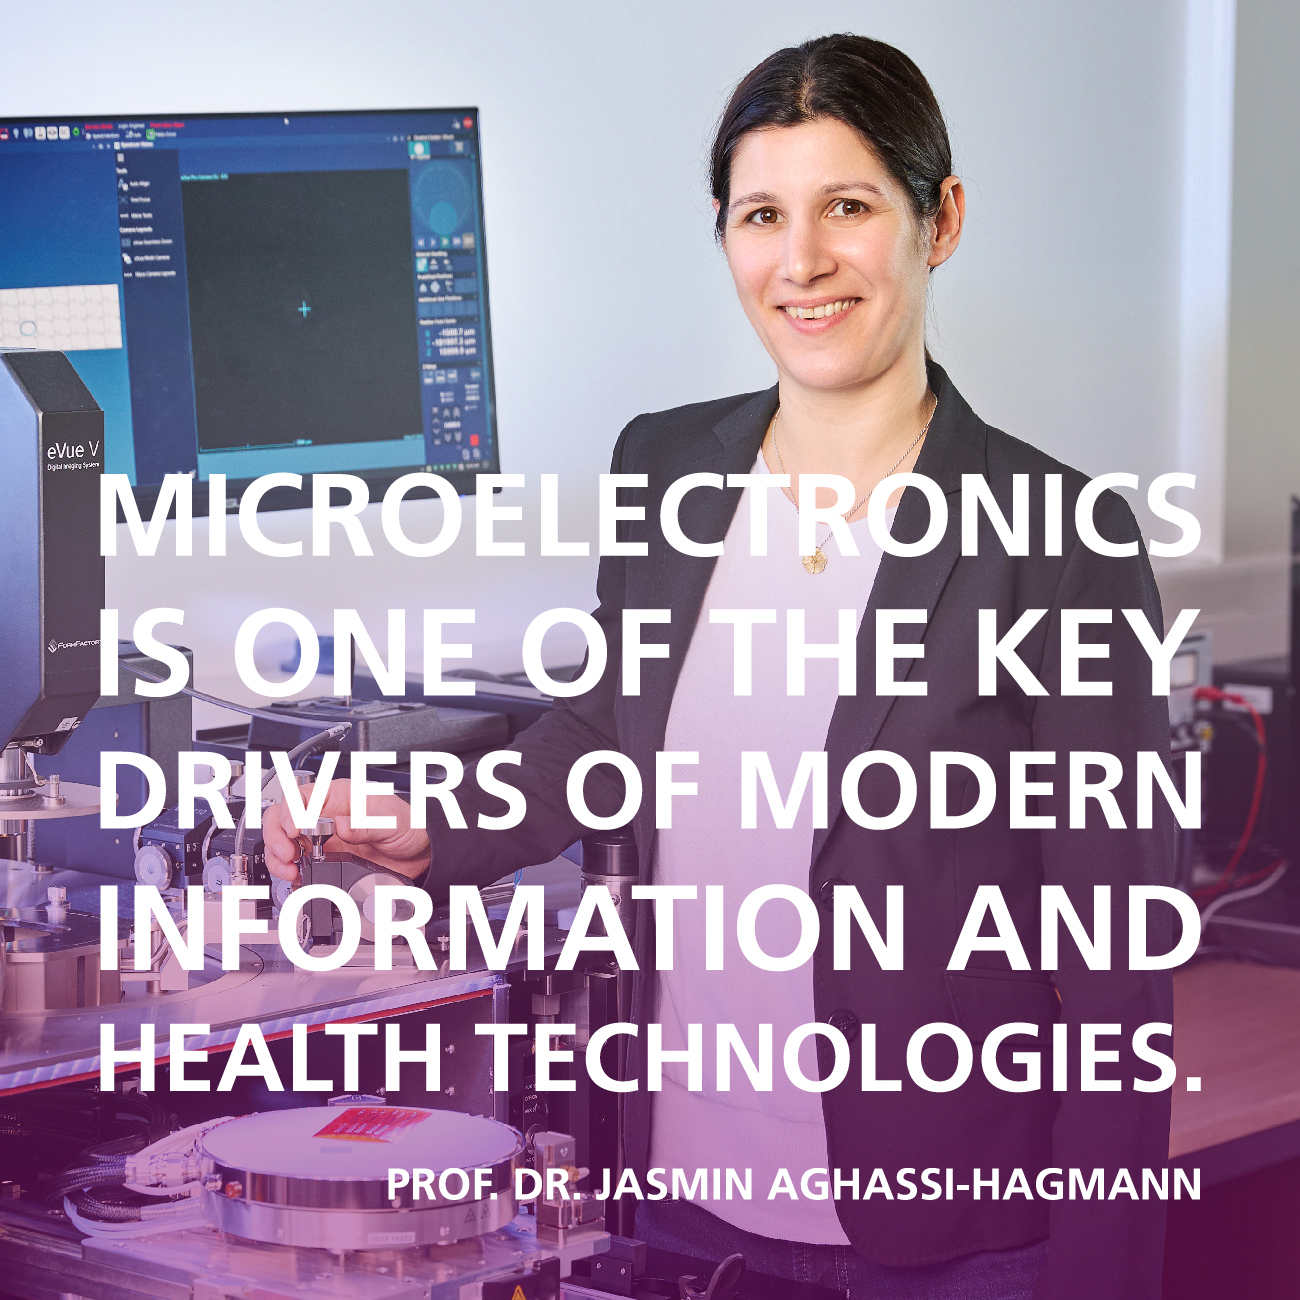 Microelectronics is one of the key drivers of modern information and health technologies. Quote by Prof. Dr. Jasmin Aghassi-Hagmann, Division 3, KIT | KIT | B3 | S.Goettisheim